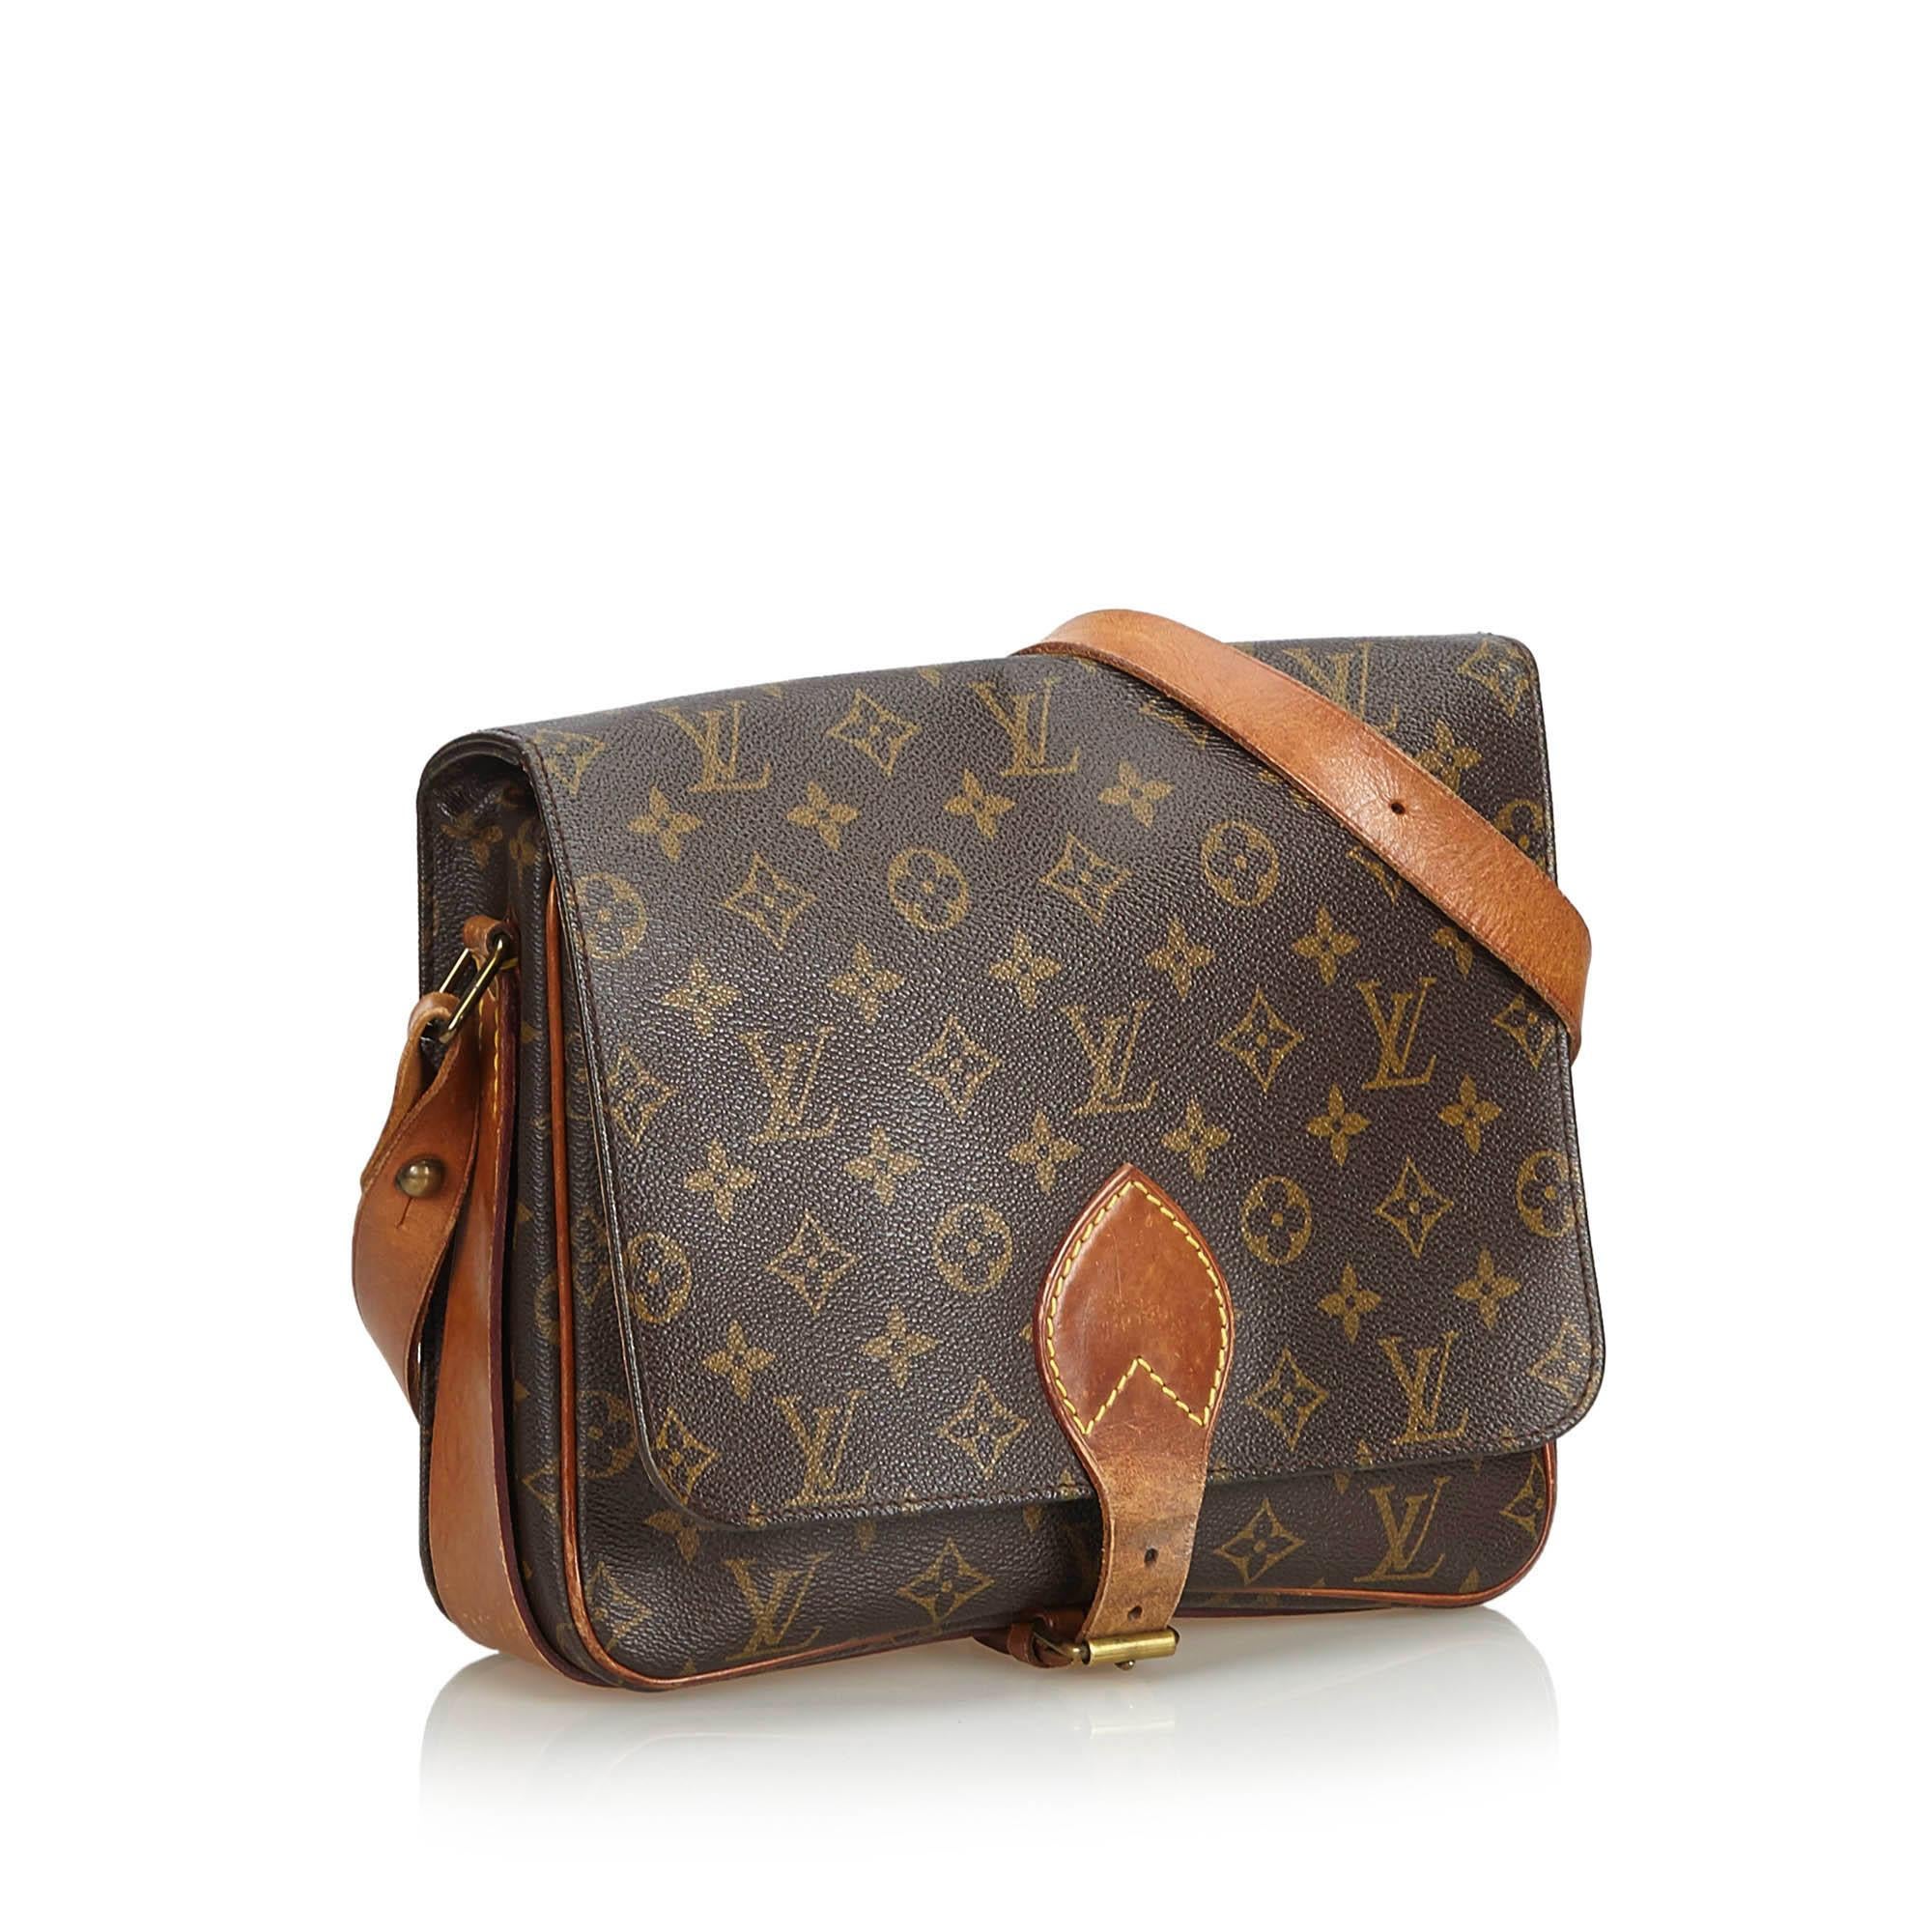 The Cartouchiere GM features a monogram canvas body, an adjustable leather strap, a front flap with a belt buckle closure, and an interior open compartment. It carries as B condition rating.

Inclusions: 
This item does not come with